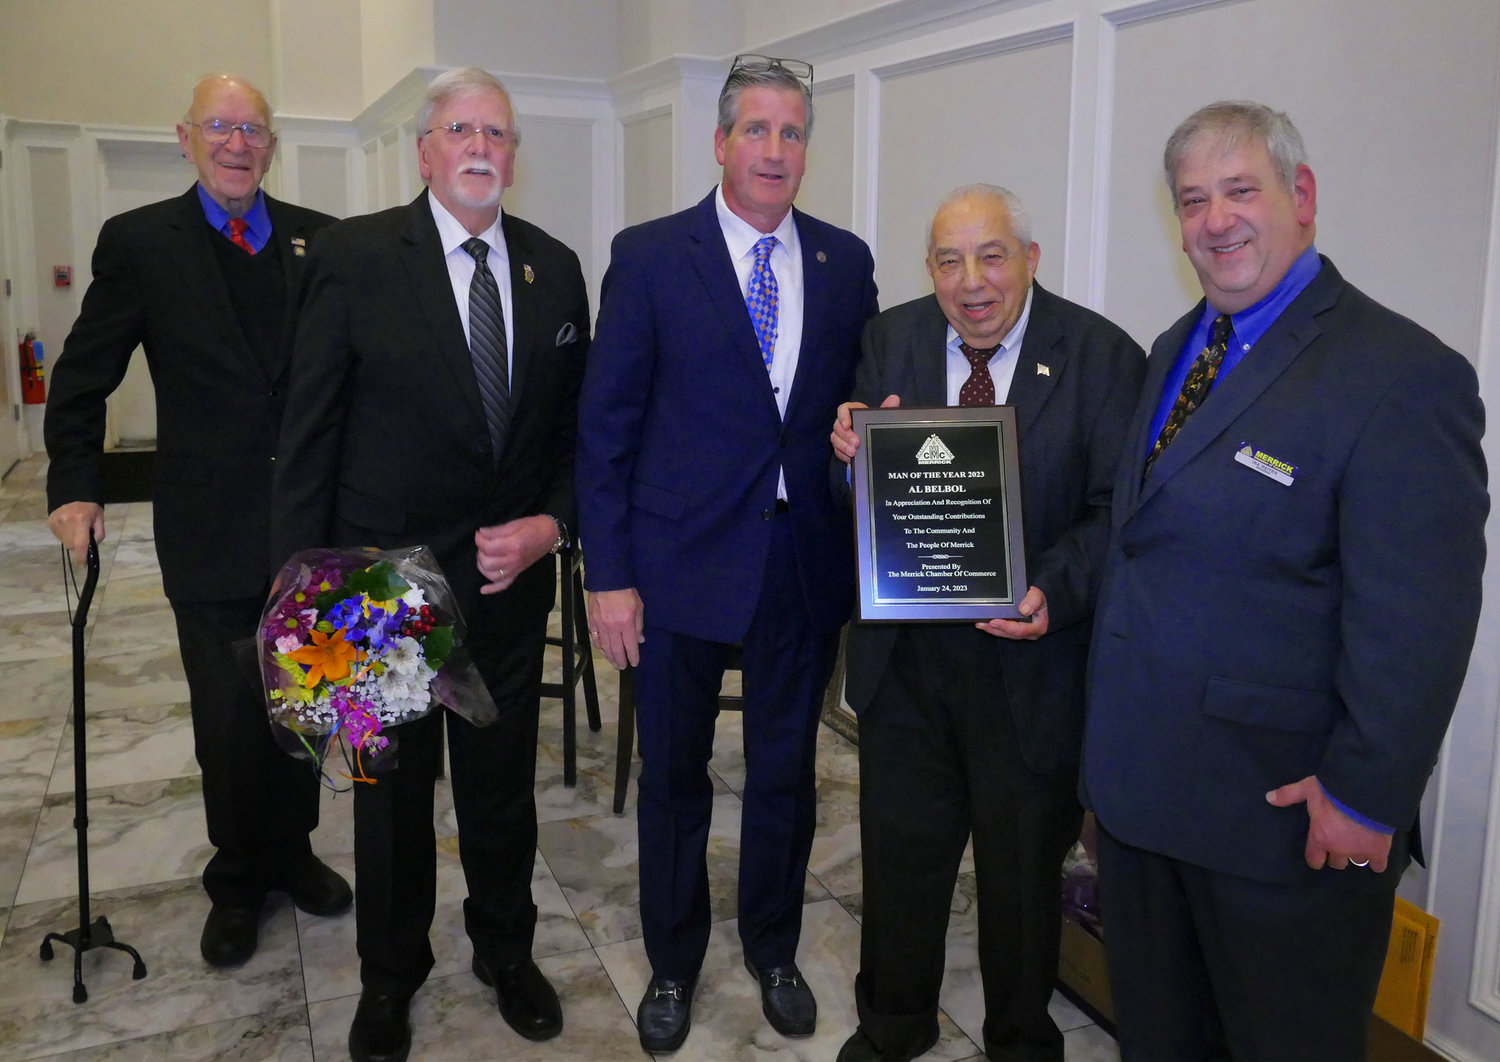 Assemblyman Dave McDonough, chamber board members Joe Baker and Douglas Mills, and chamber president Ira Reiter honored Man of the Year, Al Belbol.